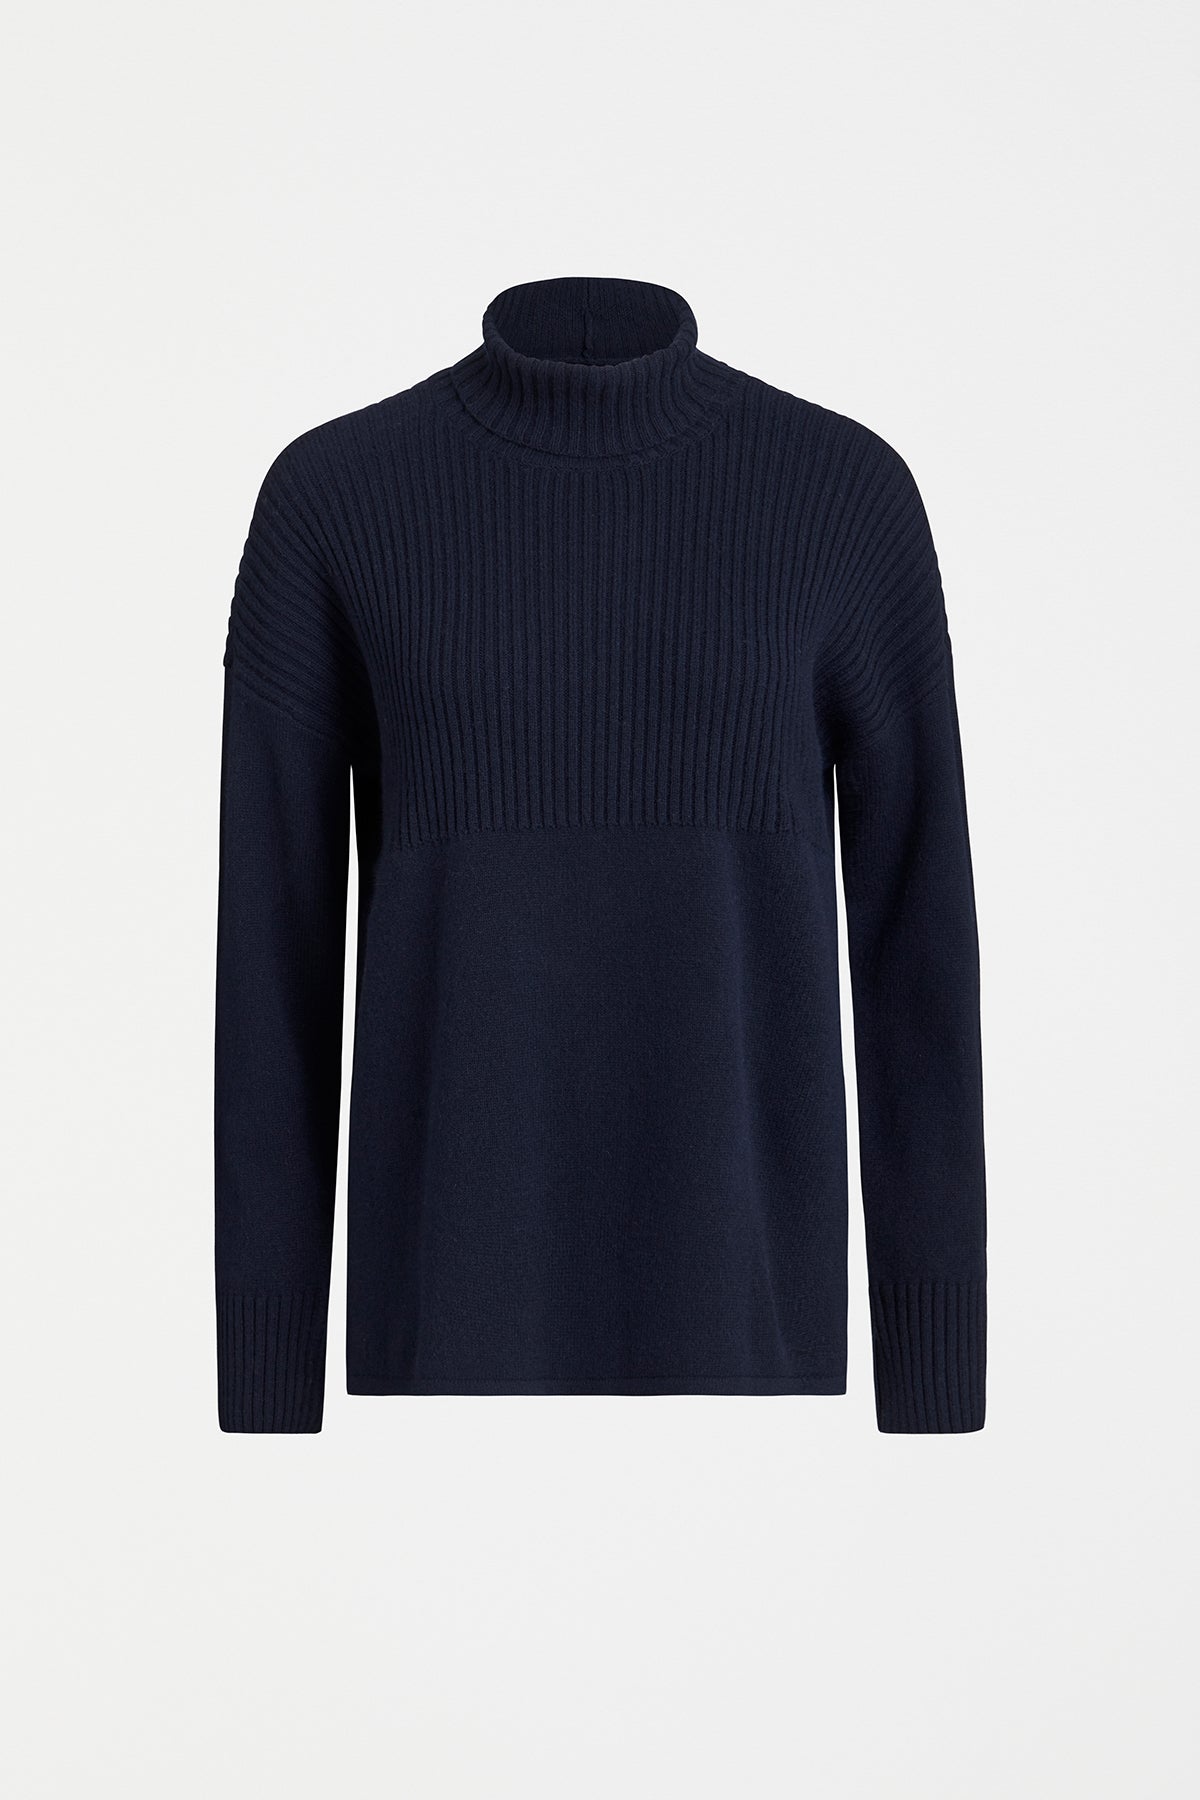 Ailda Ribbed Organic Cotton and Merino Turtle Neck Sweater Front | NAVY